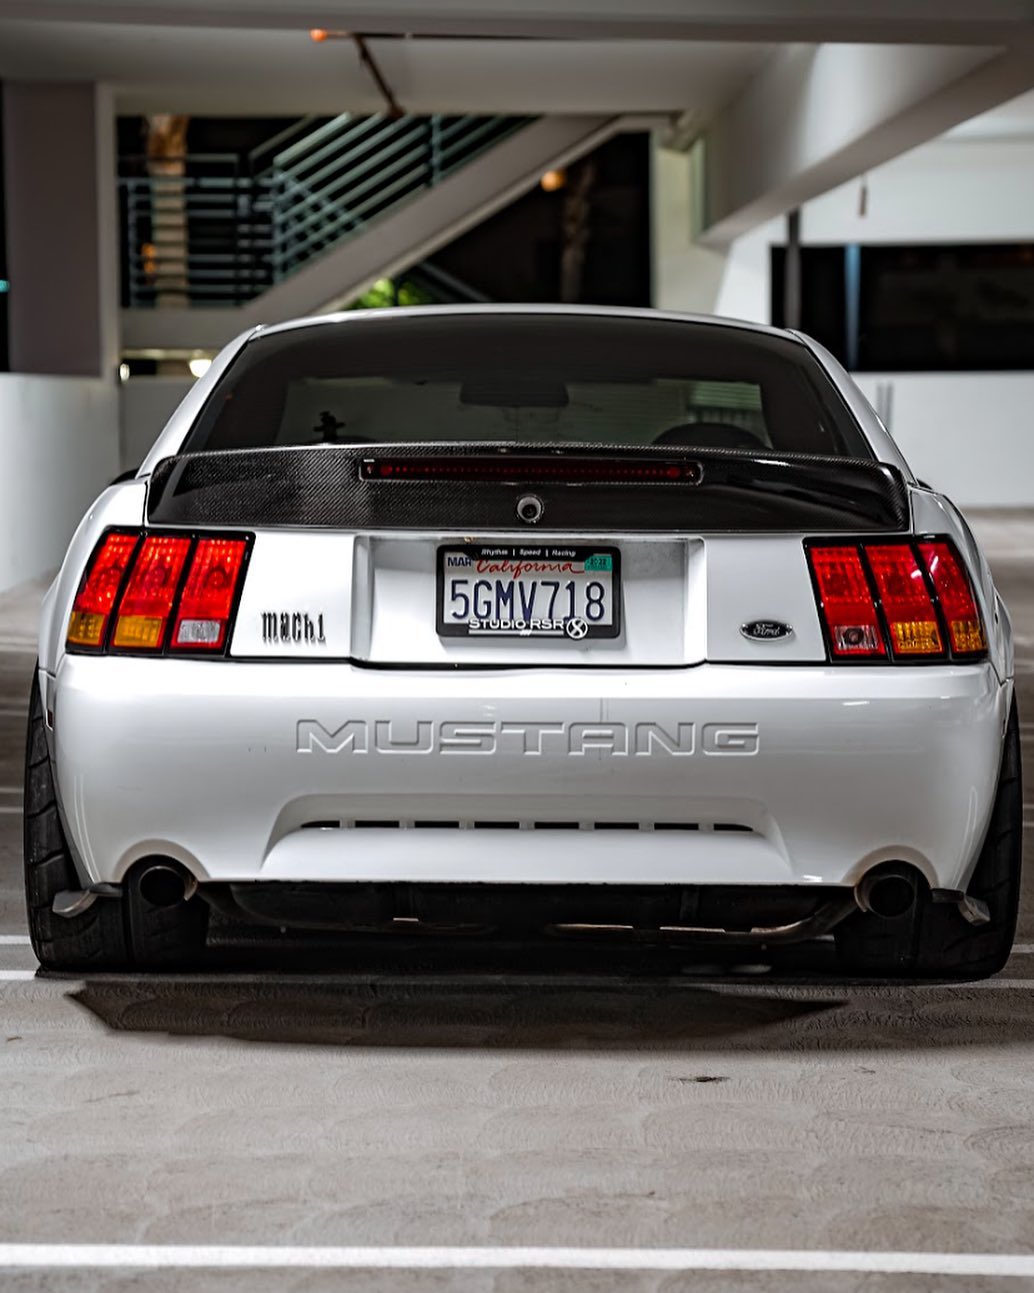 2003 Ford Mustang Mach 1 rear view with Amber sequential taillights